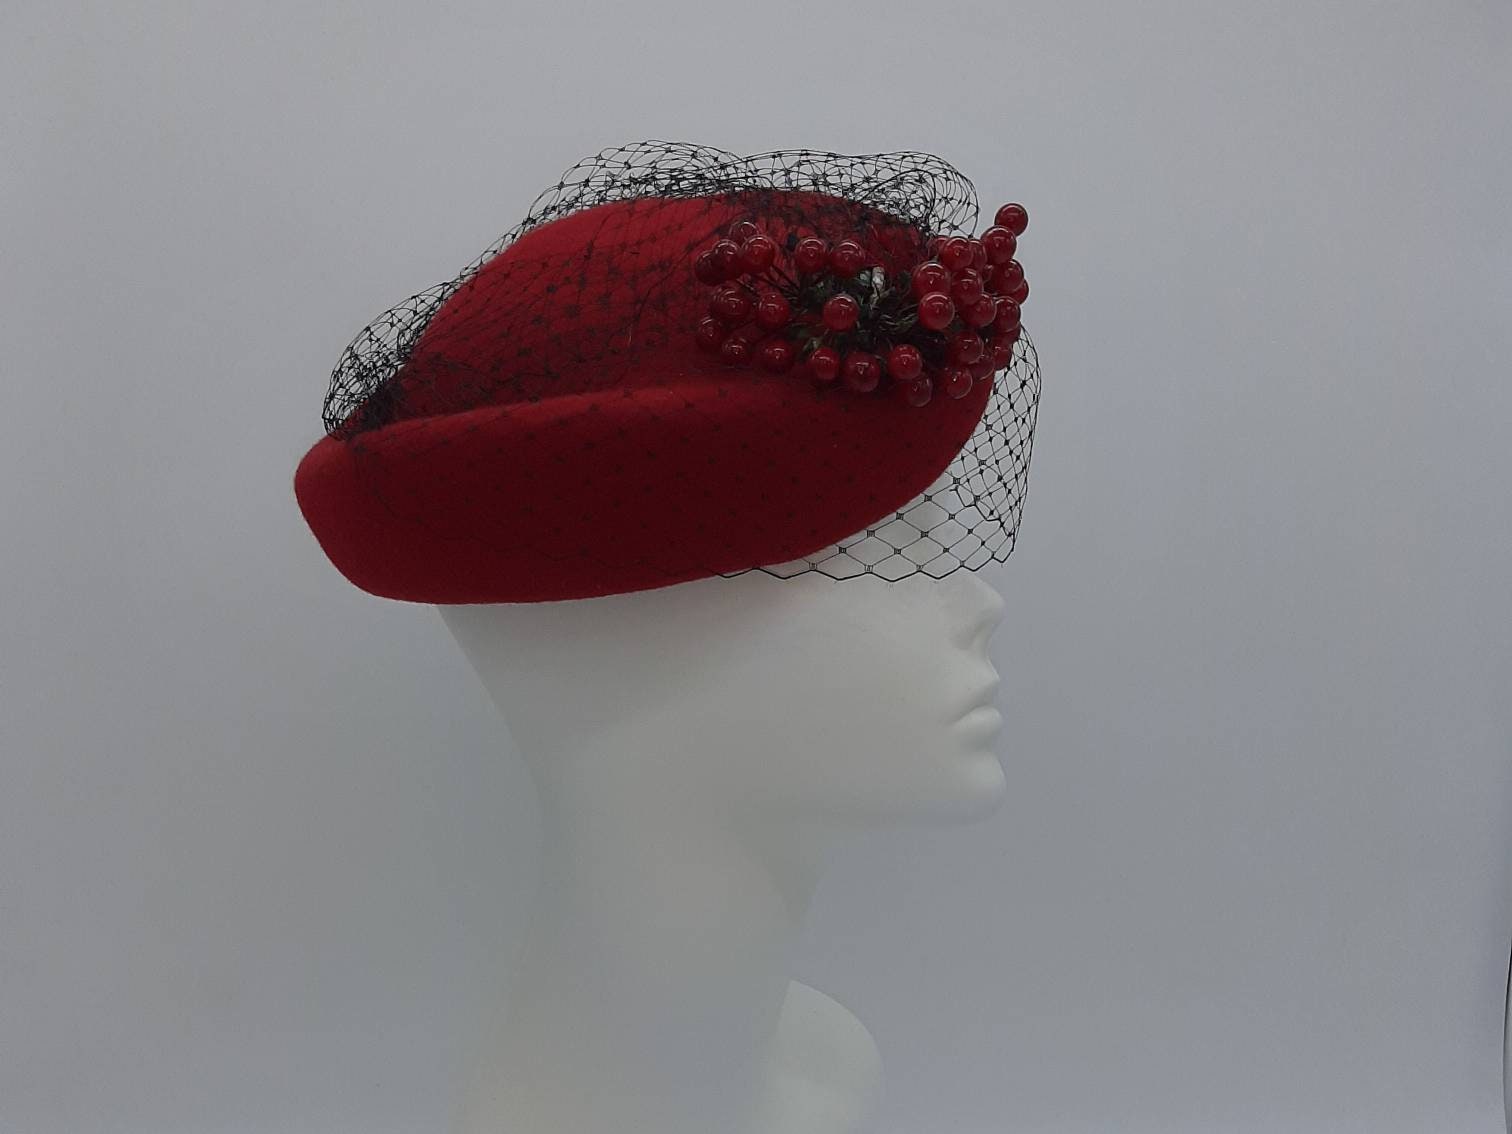 Red Berry Percher Hat